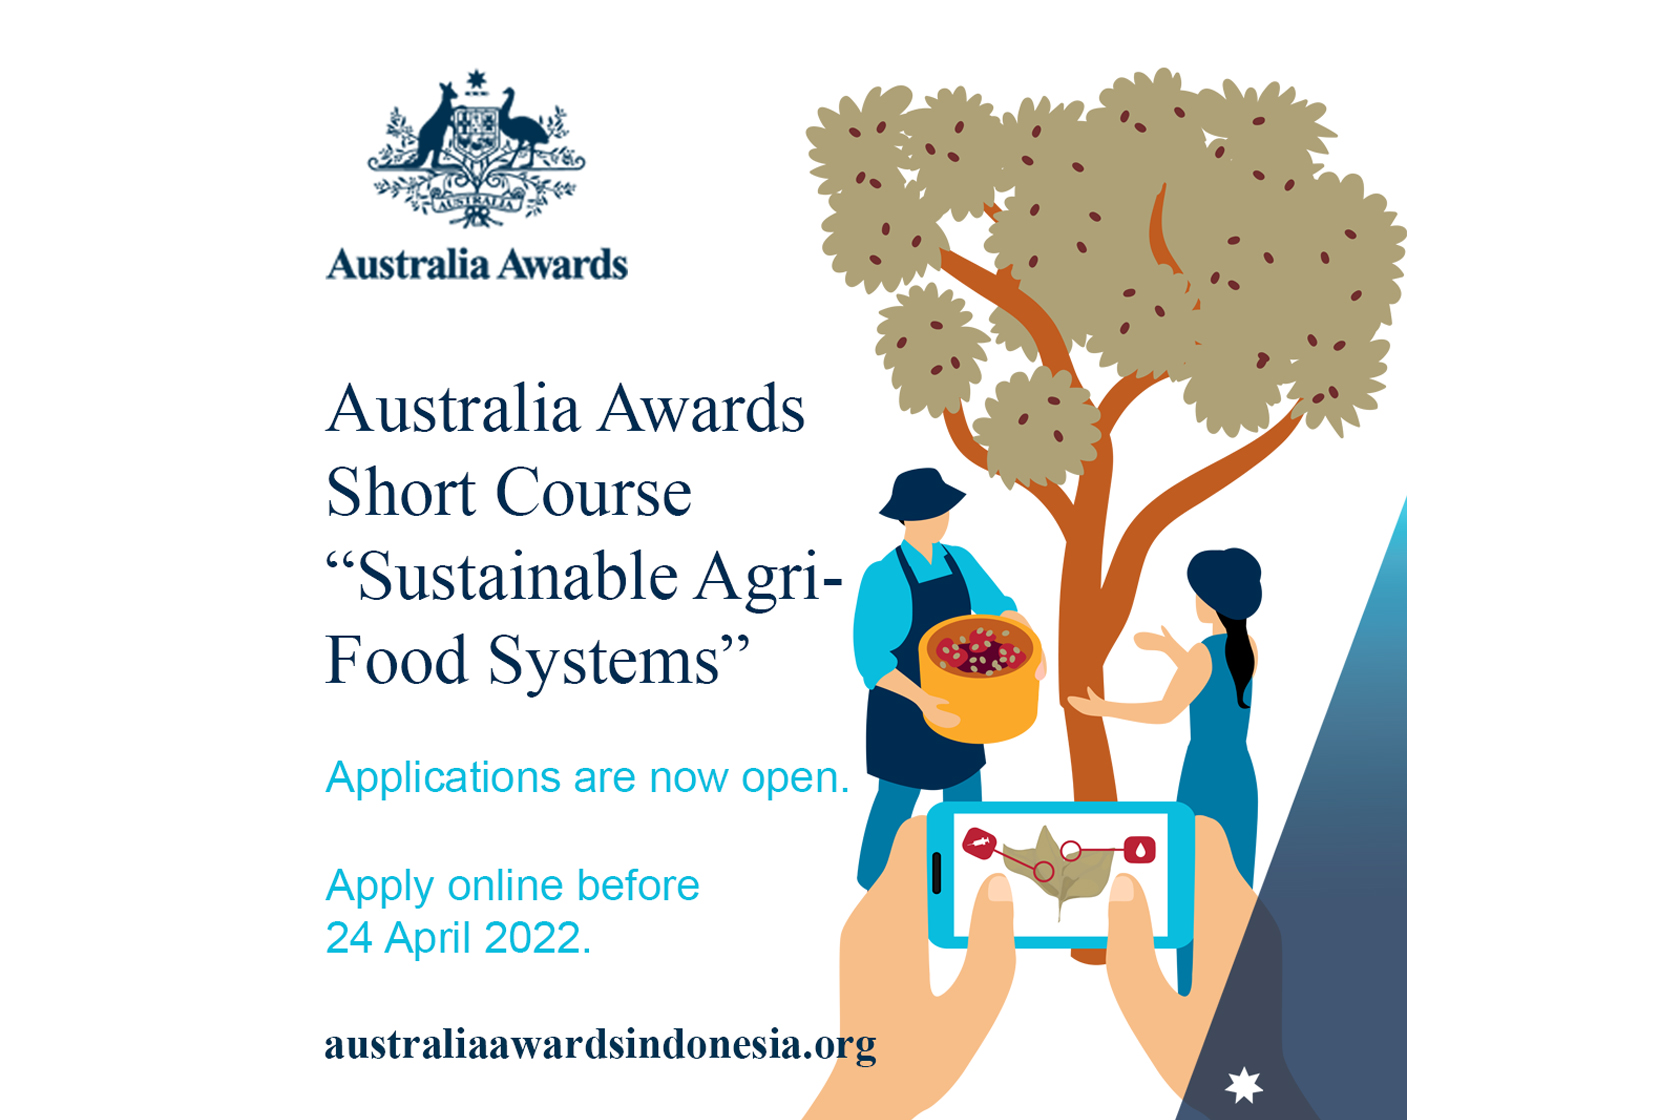 Applications Open for the Australia Awards Short Course on Sustainable Agri-Food Systems